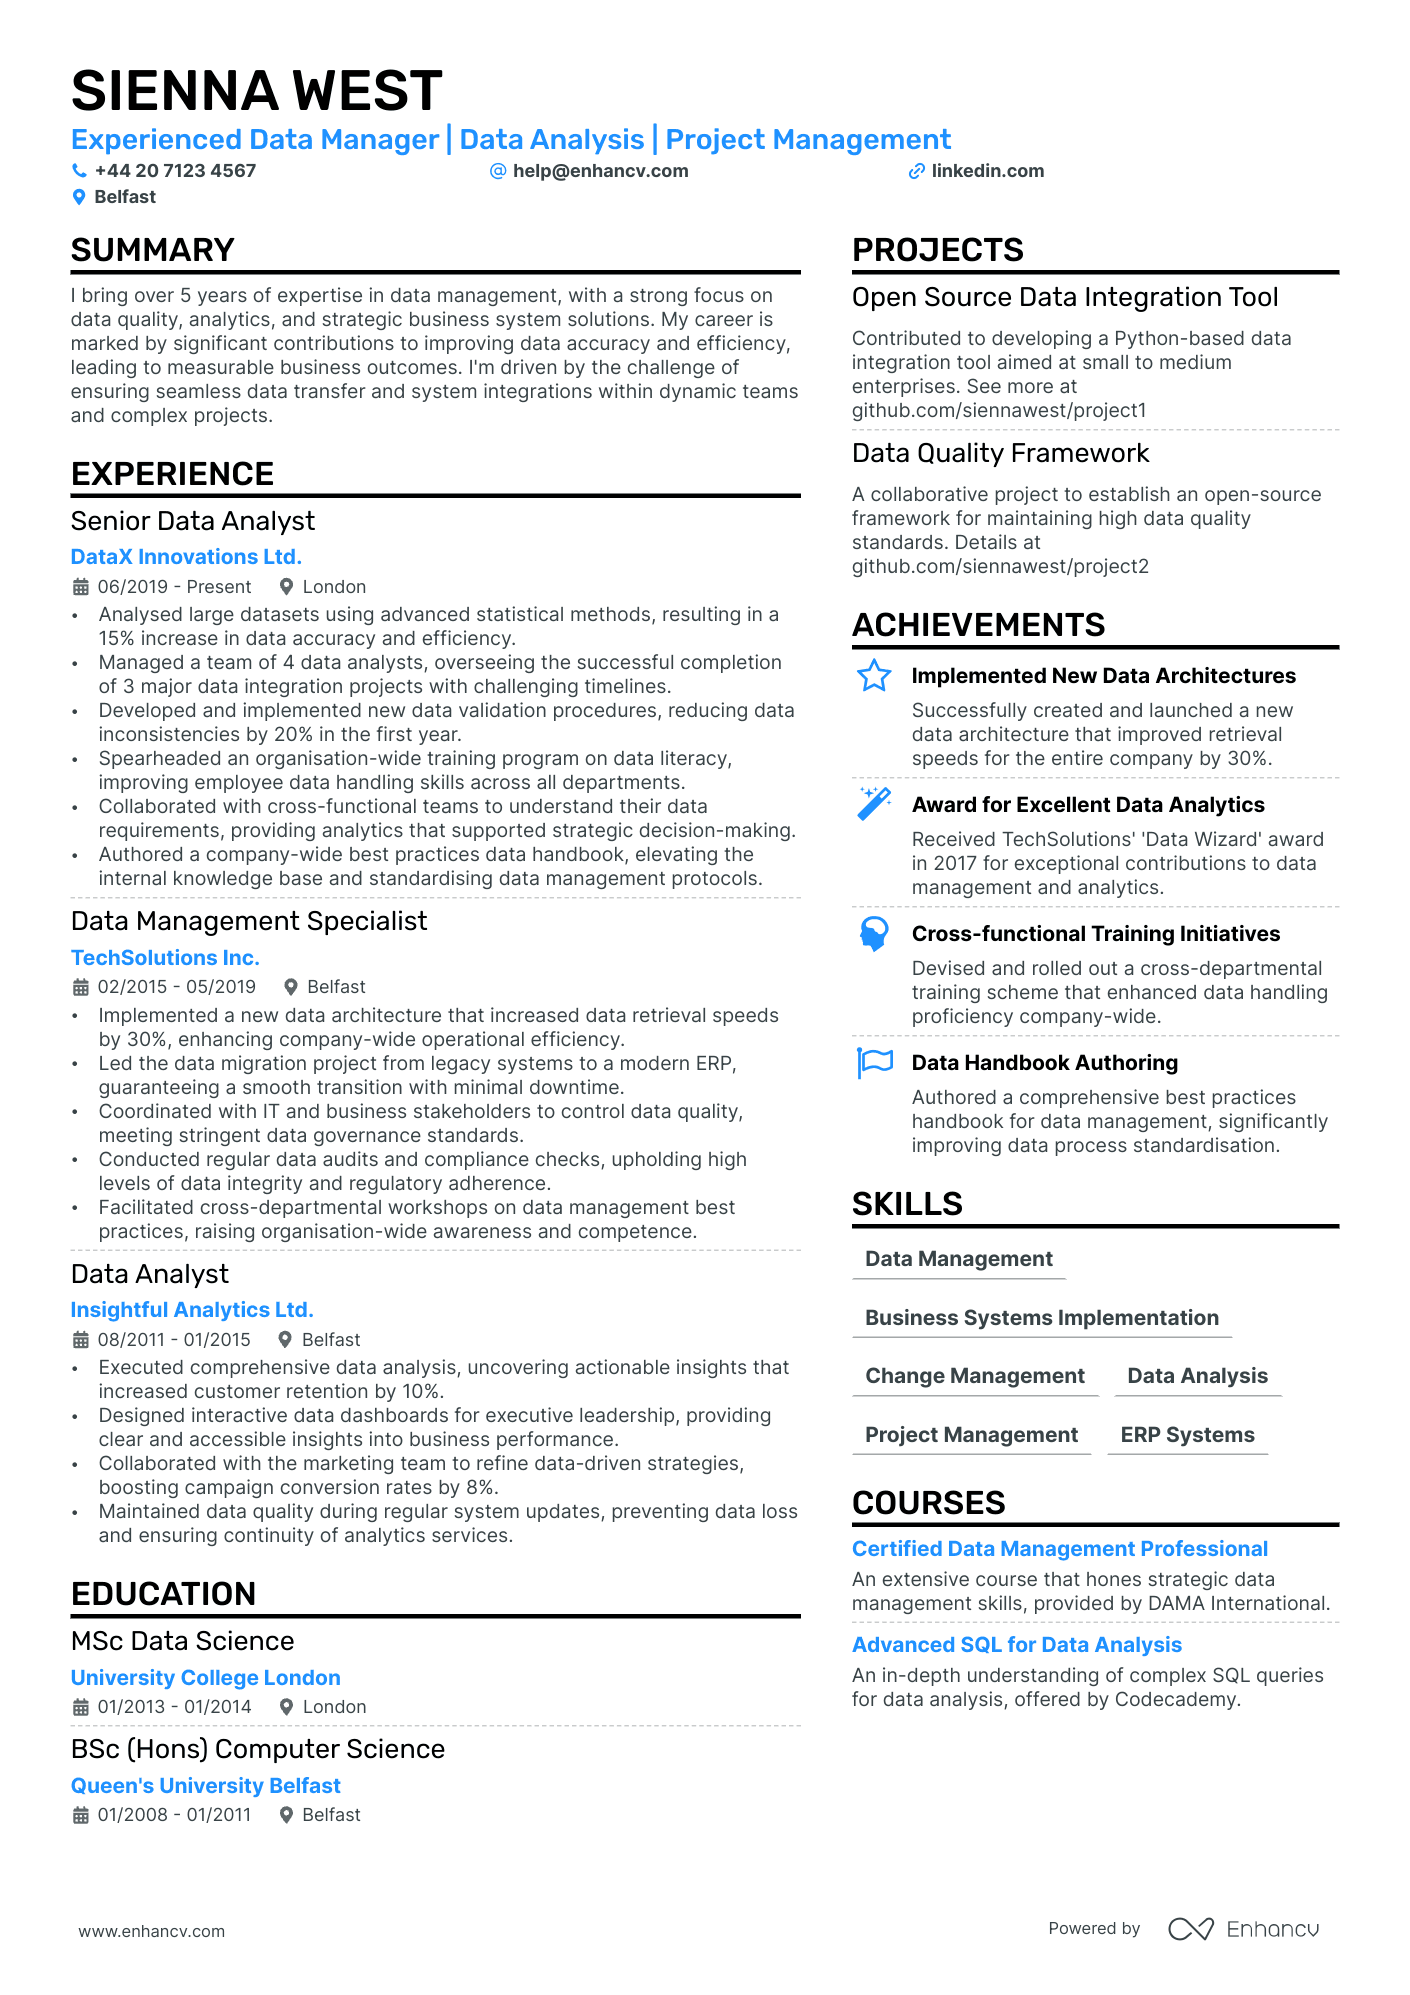 Data Manager cv example